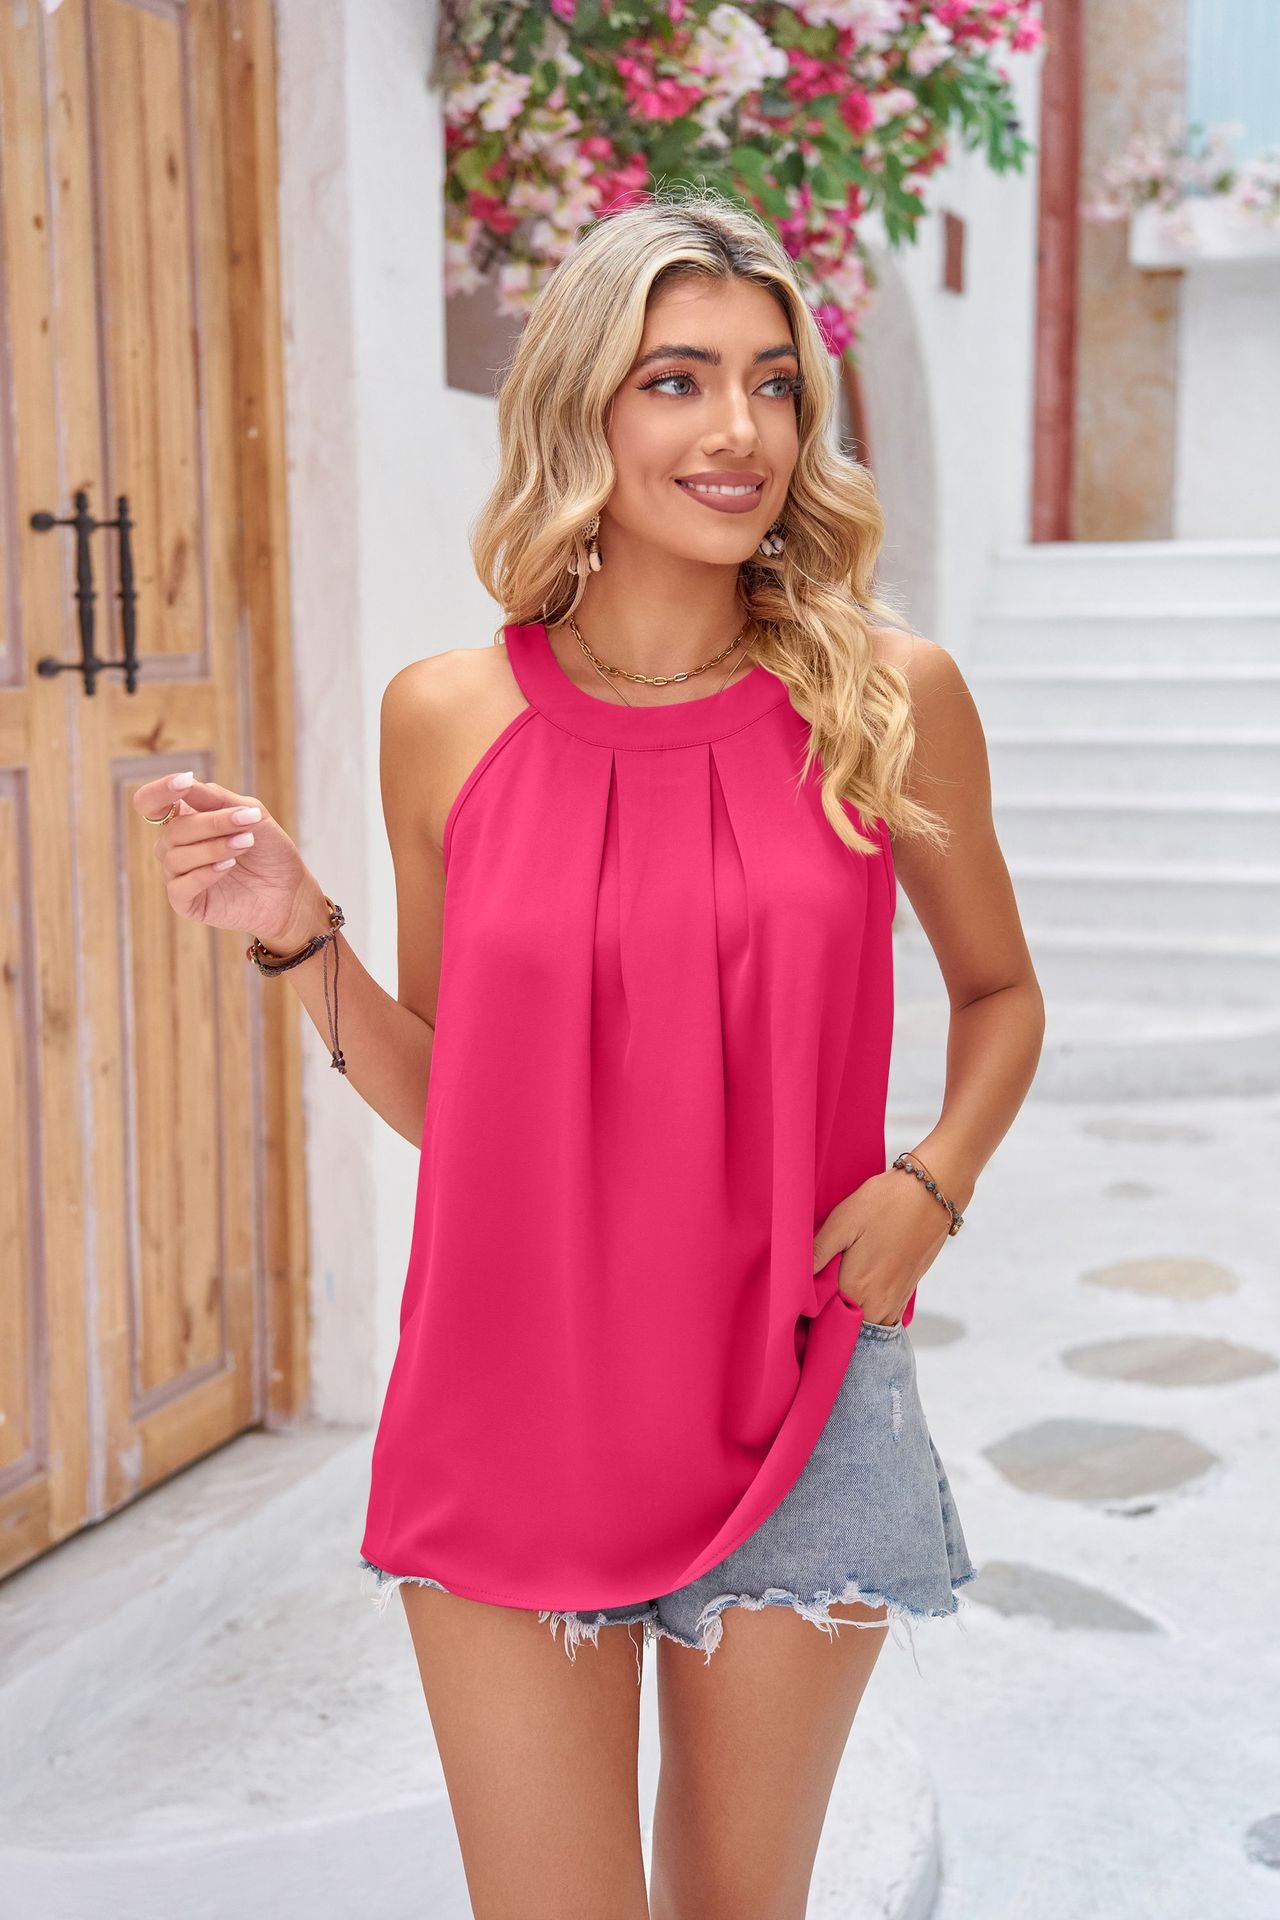 Grecian Neck Sleeveless Top - Online Only